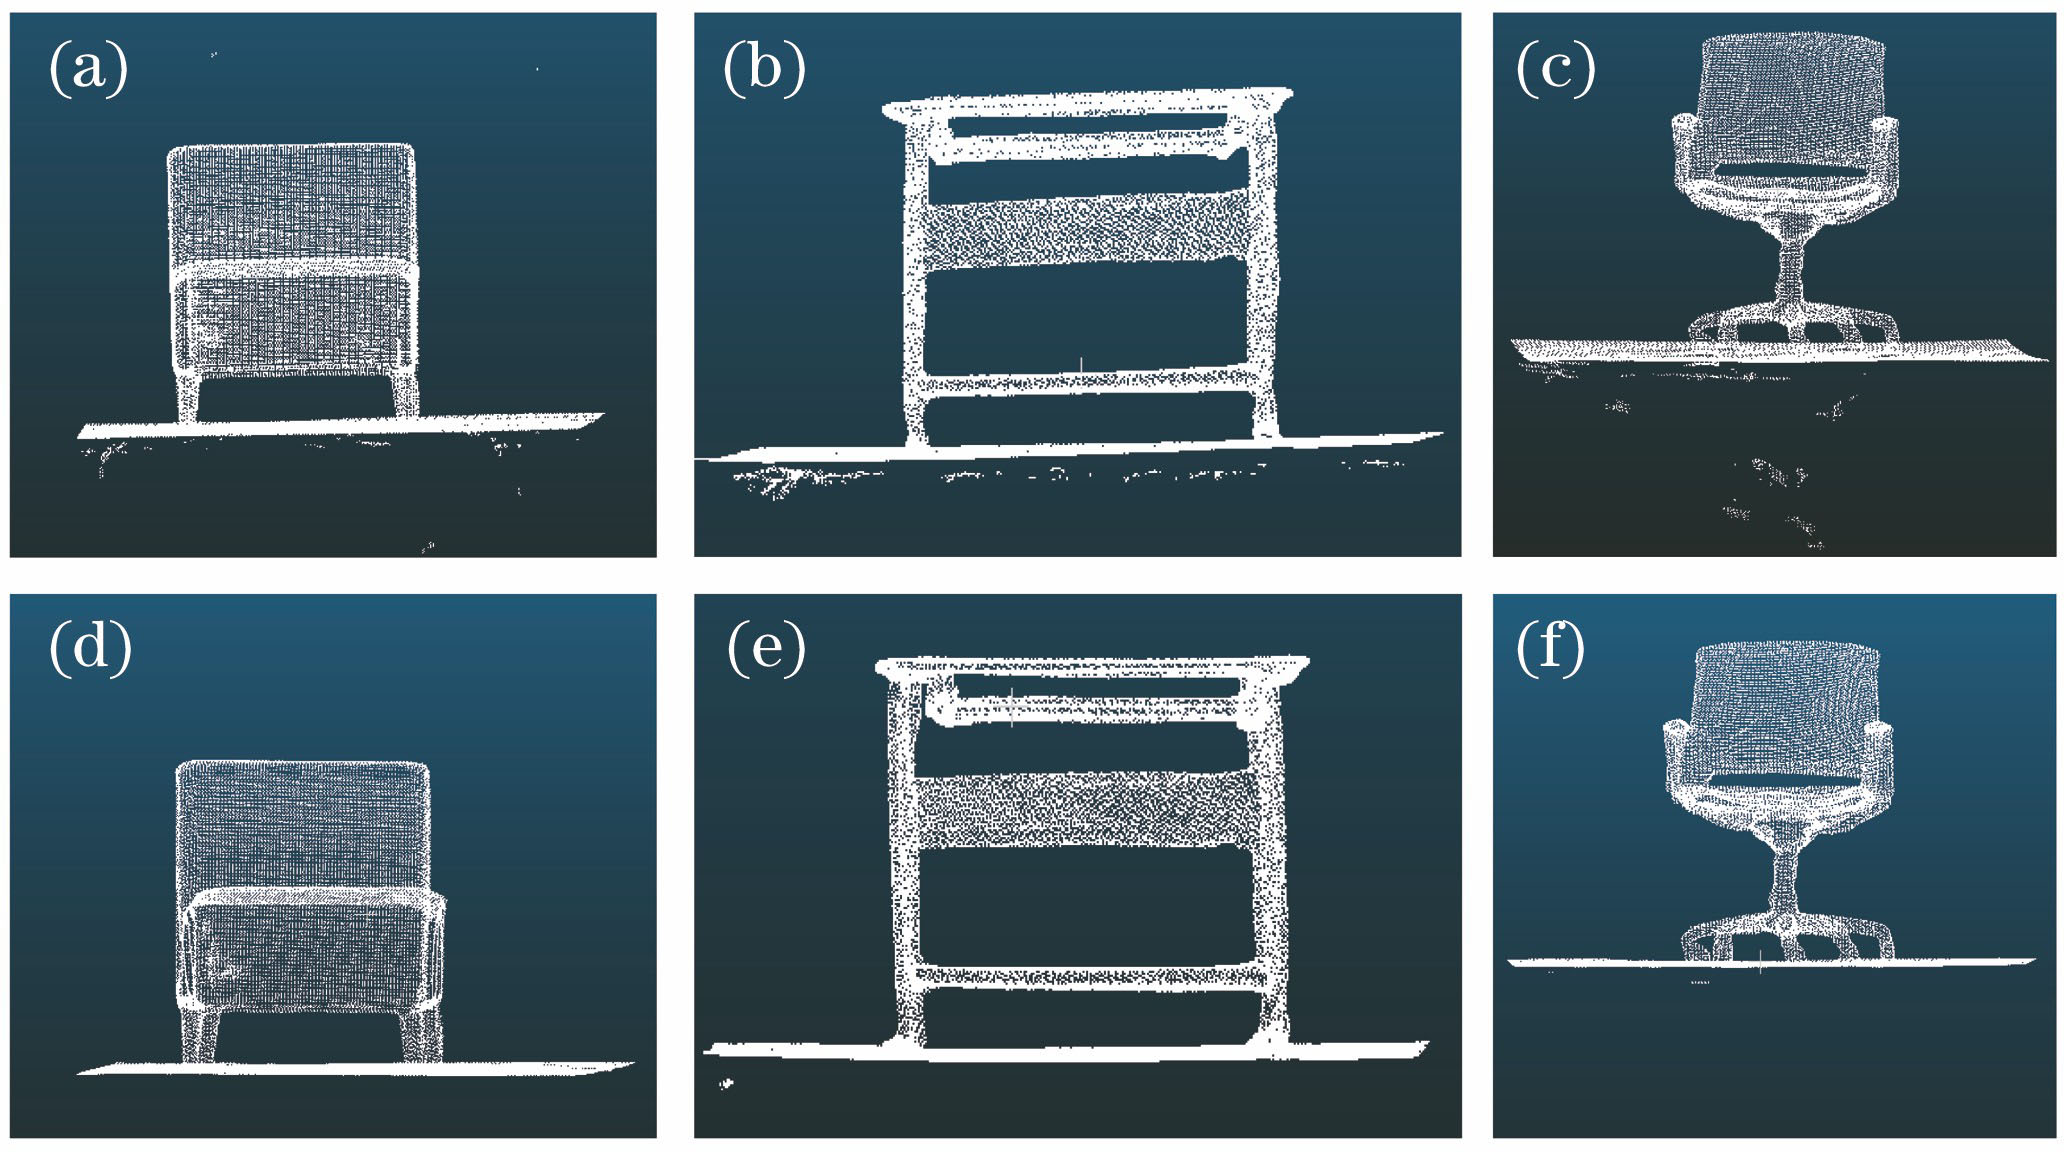 Comparison results before and after statistical filtering. (a) Sofa before filtering; (b) table before filtering; (c) chair before filtering; (d) sofa after filtering; (e) table after filtering; (f) chair after filtering